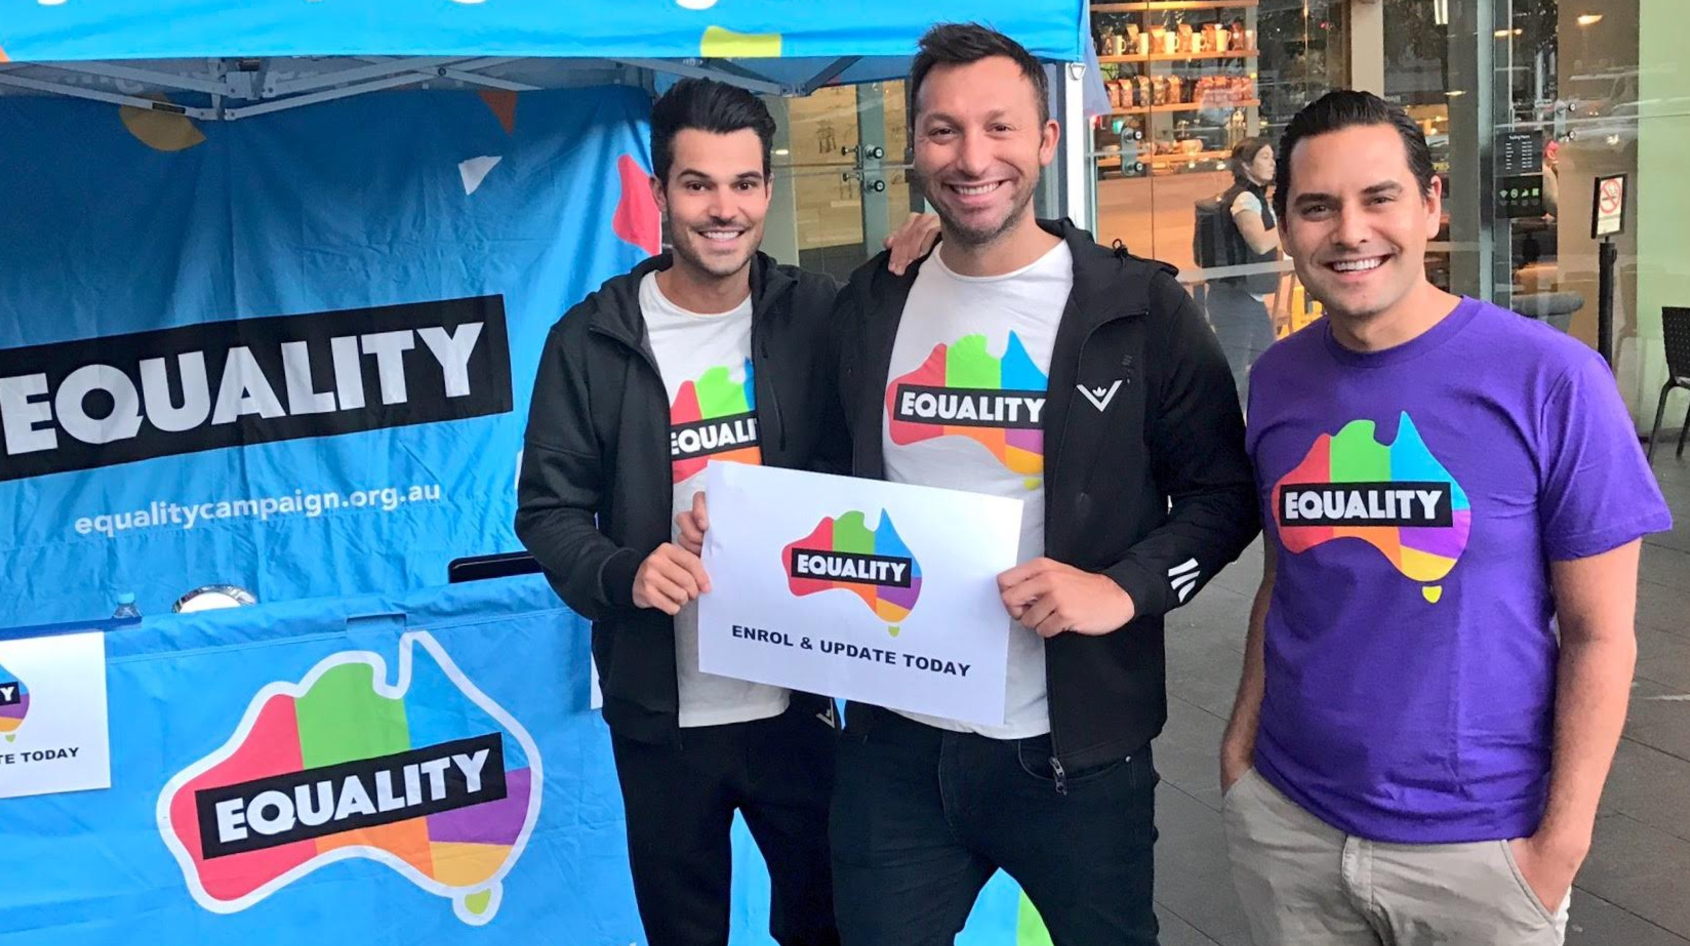 It’s time for Australians to enrol for equality now